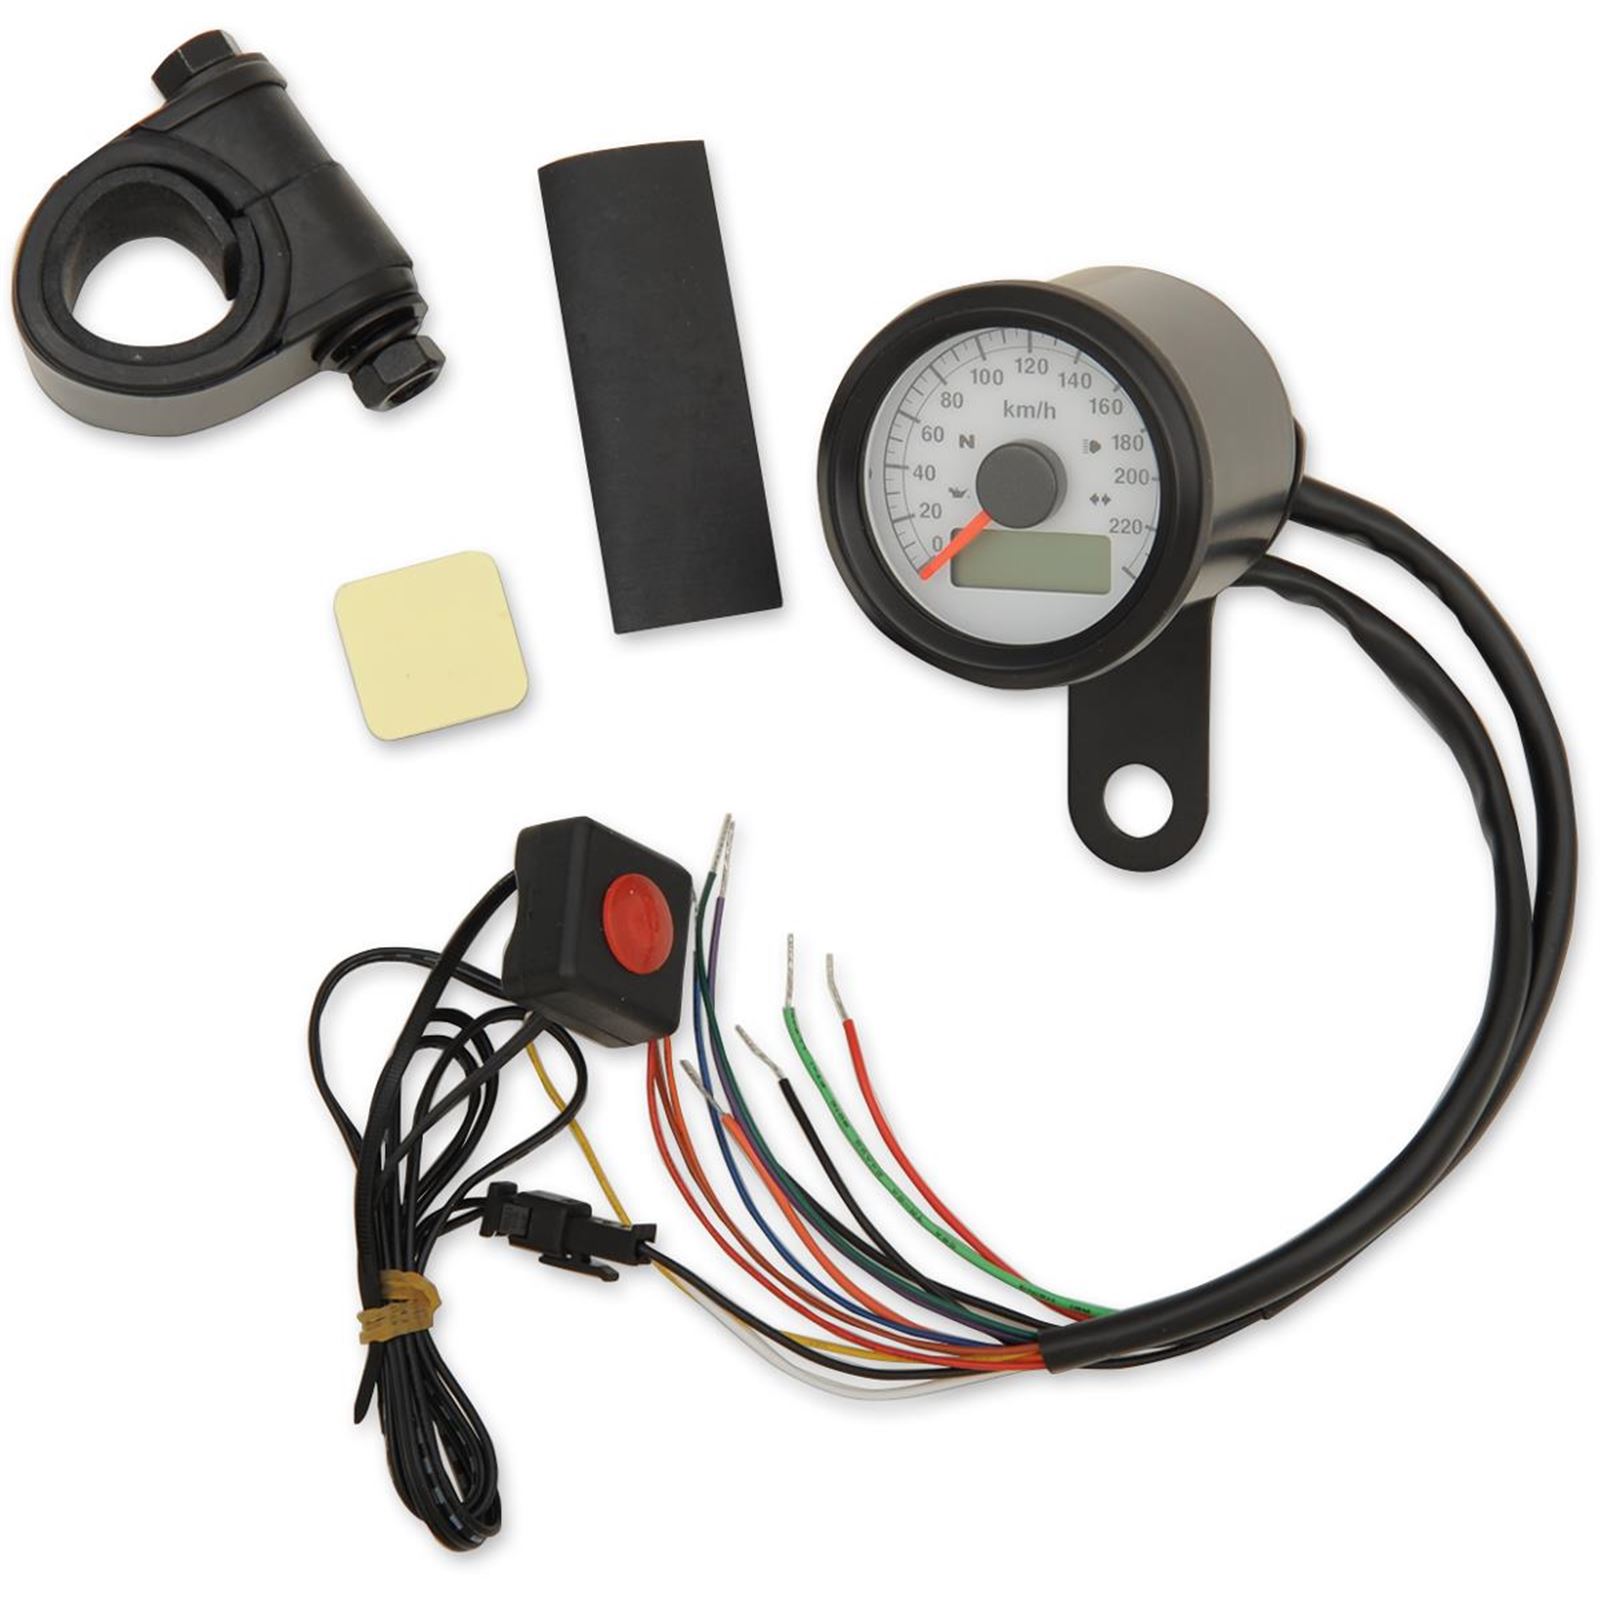 Drag Specialties 1-7/8" Programmable Speedometer with Indicator Lights - Gloss Black - 220 KPH LED White Face